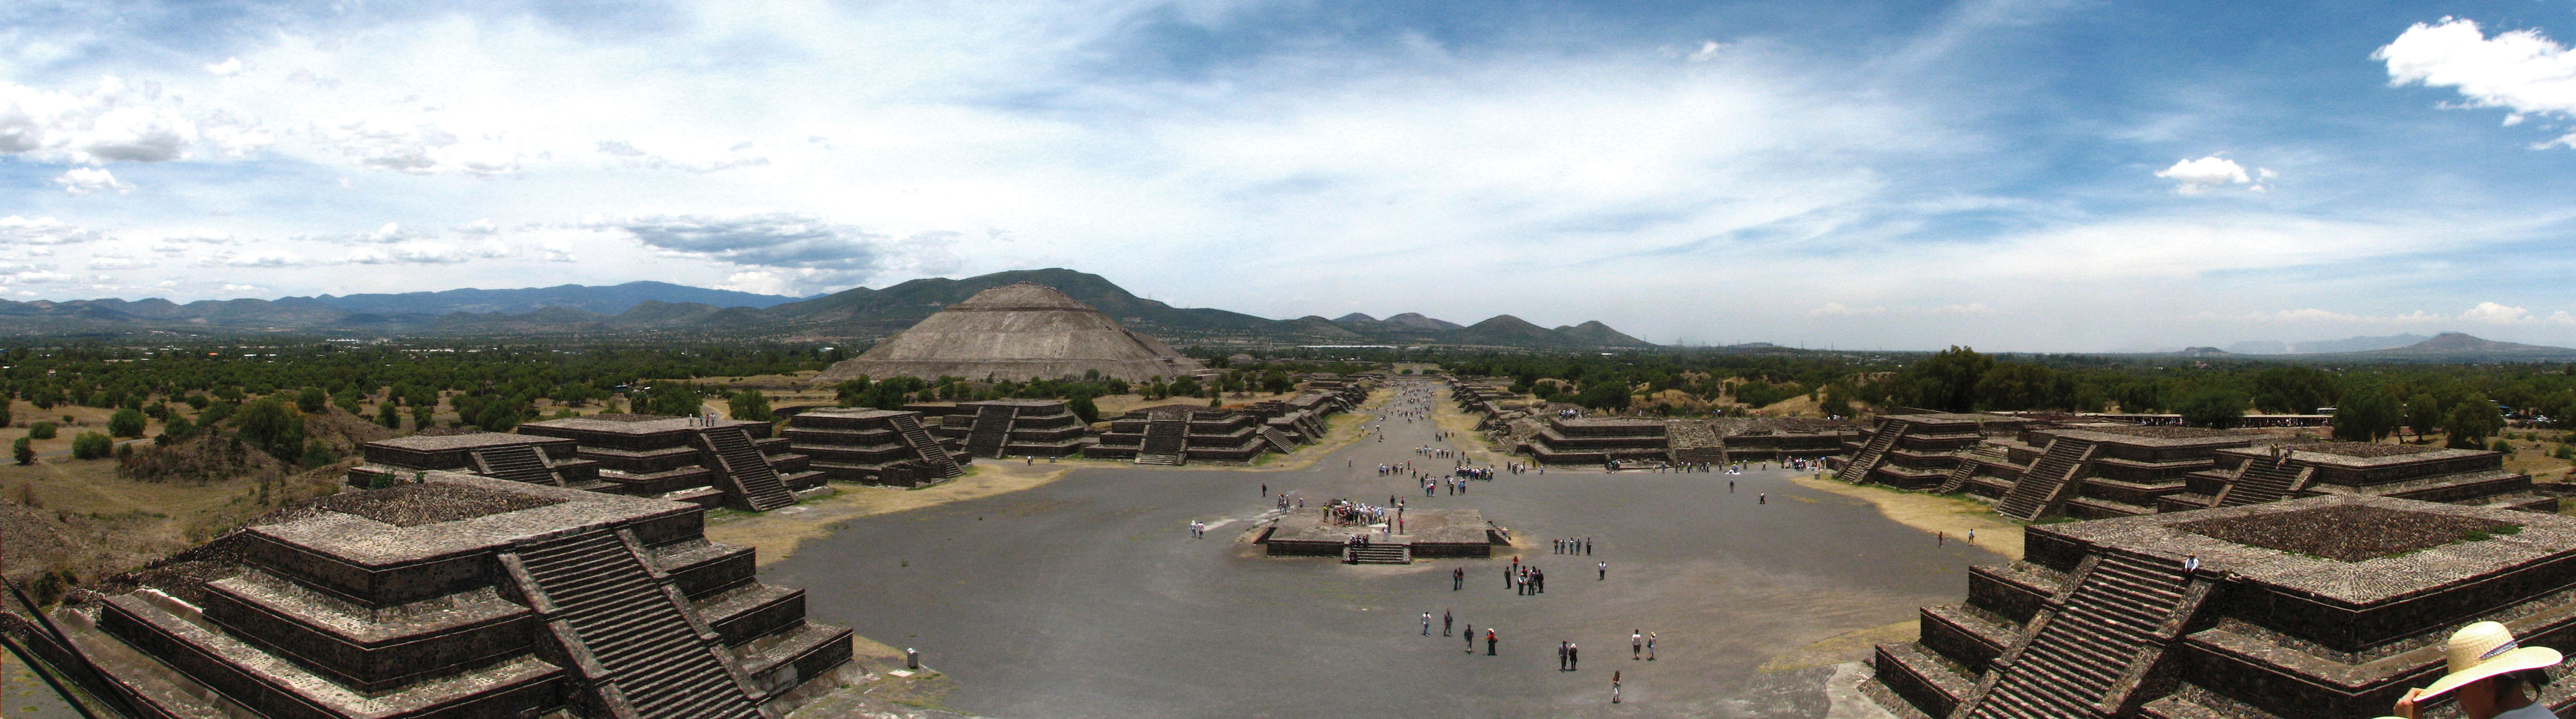 An aerial view of the structures on the Avenue of the Dead and the Pyramid of the Sun at Teotihuacán. (Photo by Oscar Palma.)